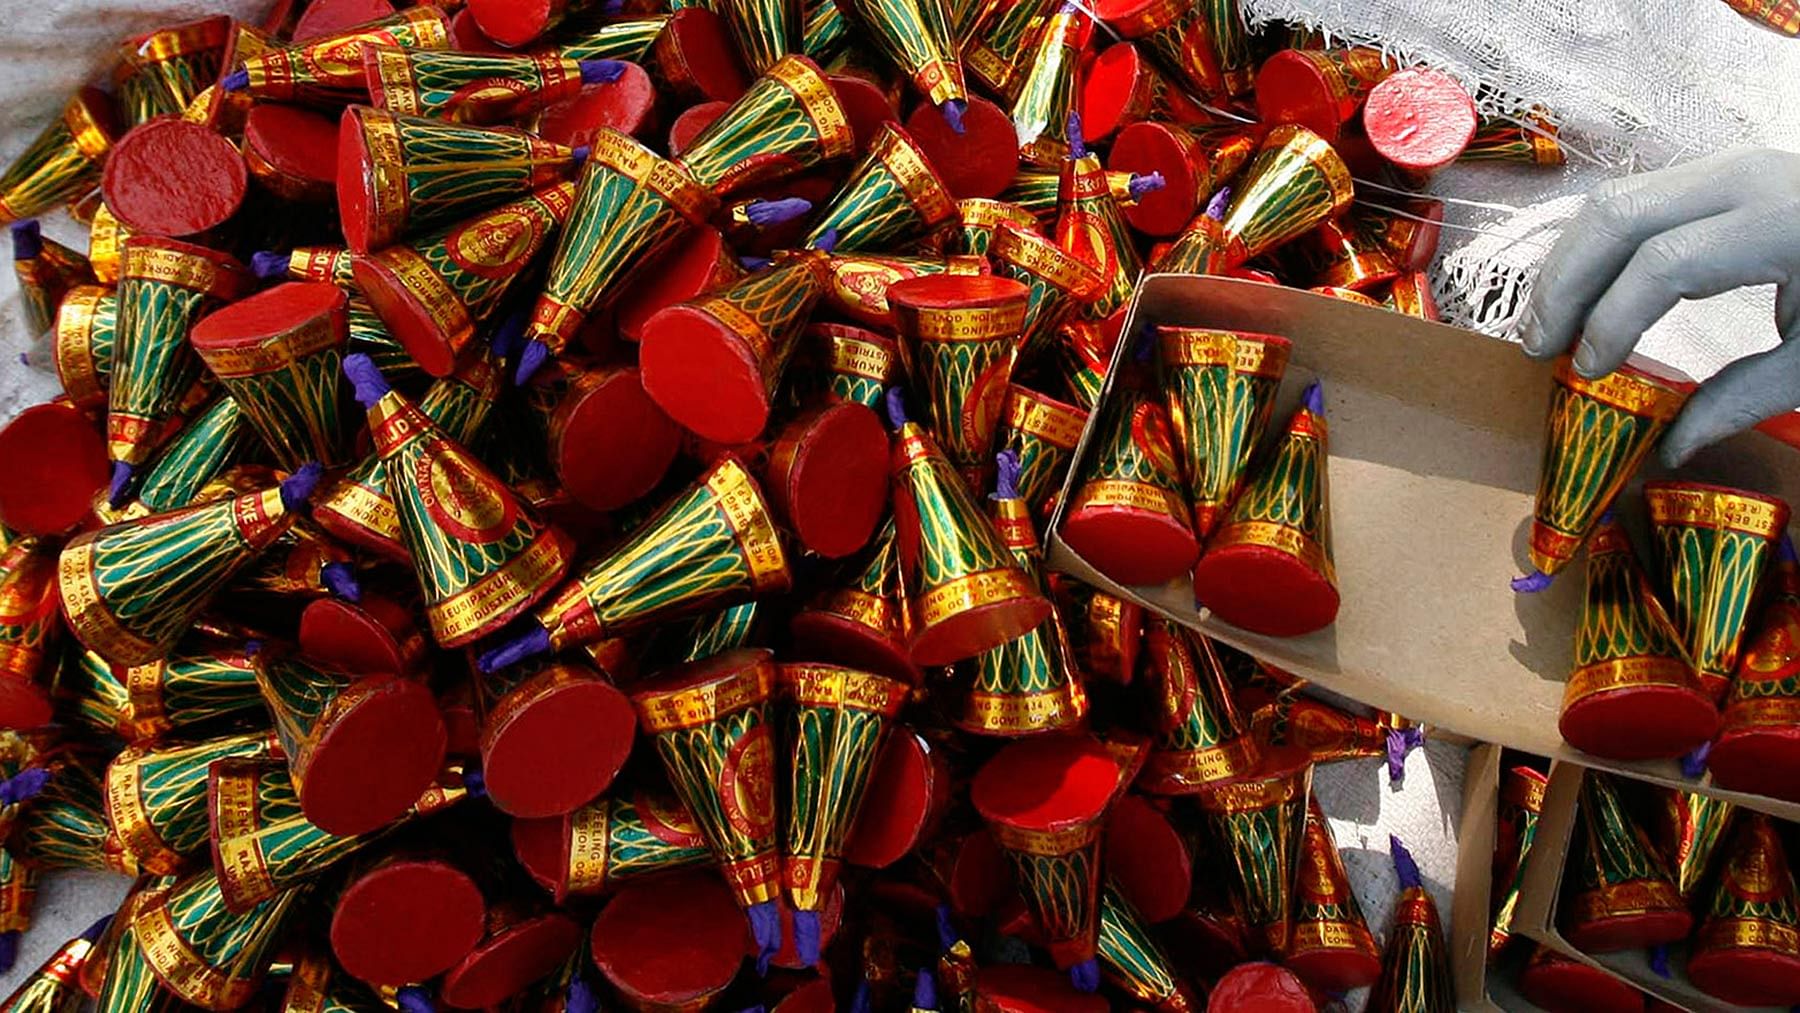 1,182 kg of firecrackers were seized from Delhi.